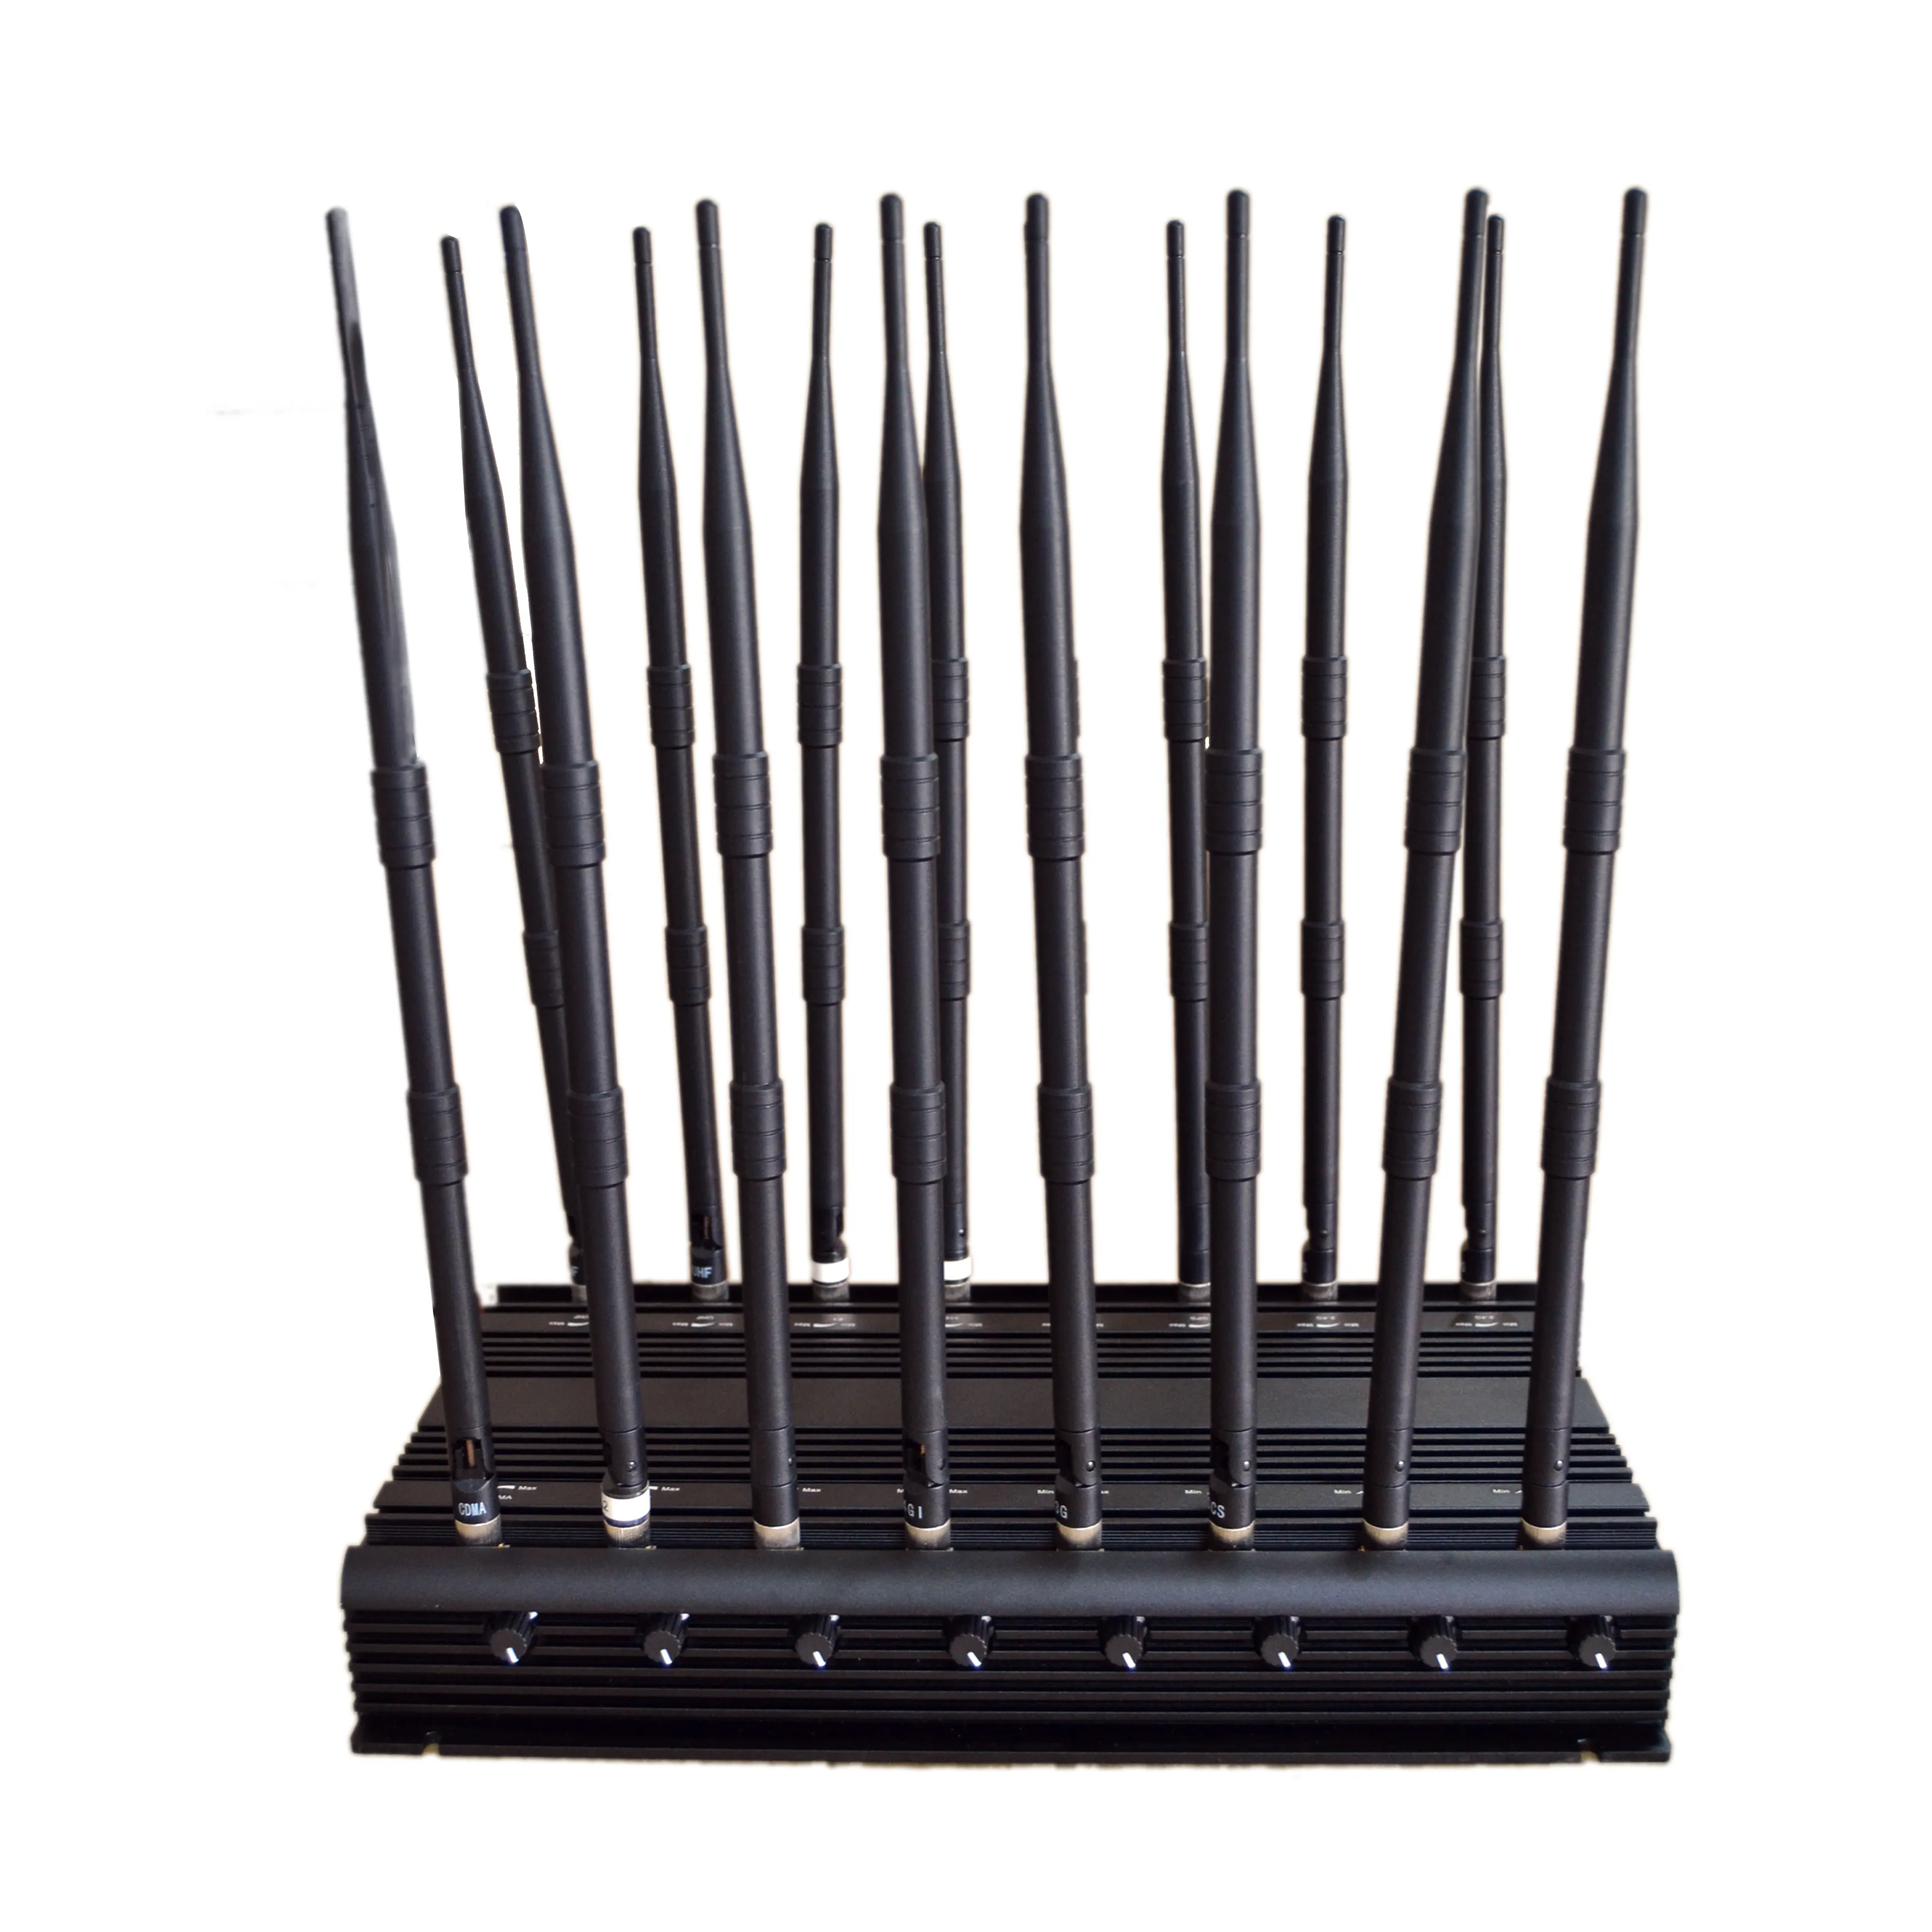  16-Band Mobile Phone Signal Jammer